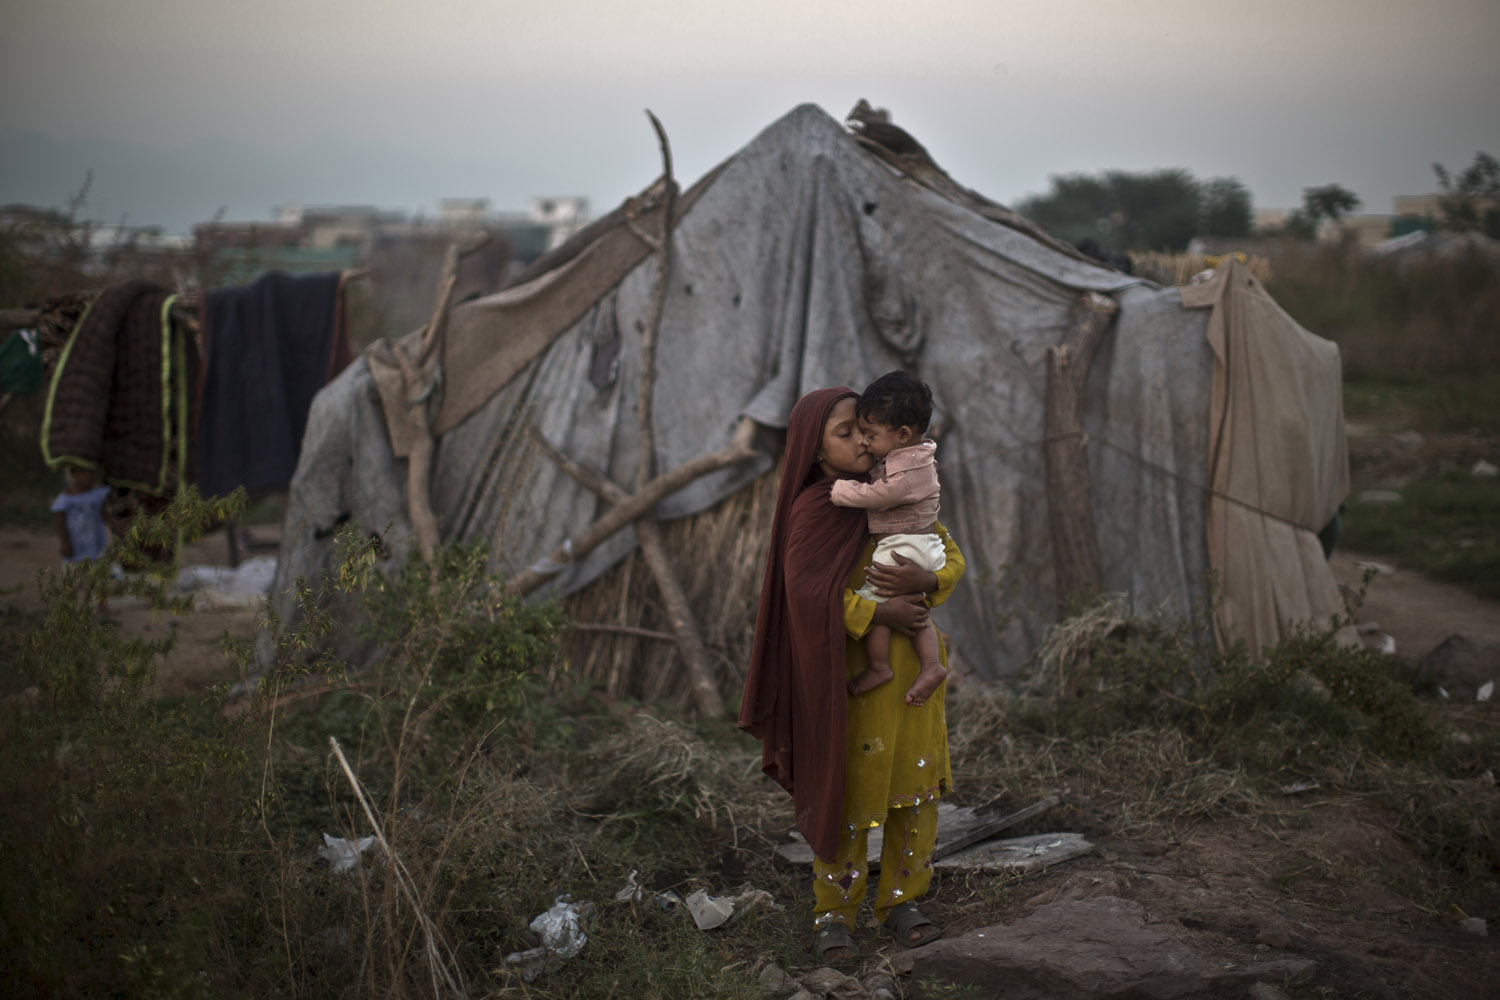 Oct. 21, 2013. A Pakistani girl comforts her brother near her family's makeshift tent in a slum in Islamabad.